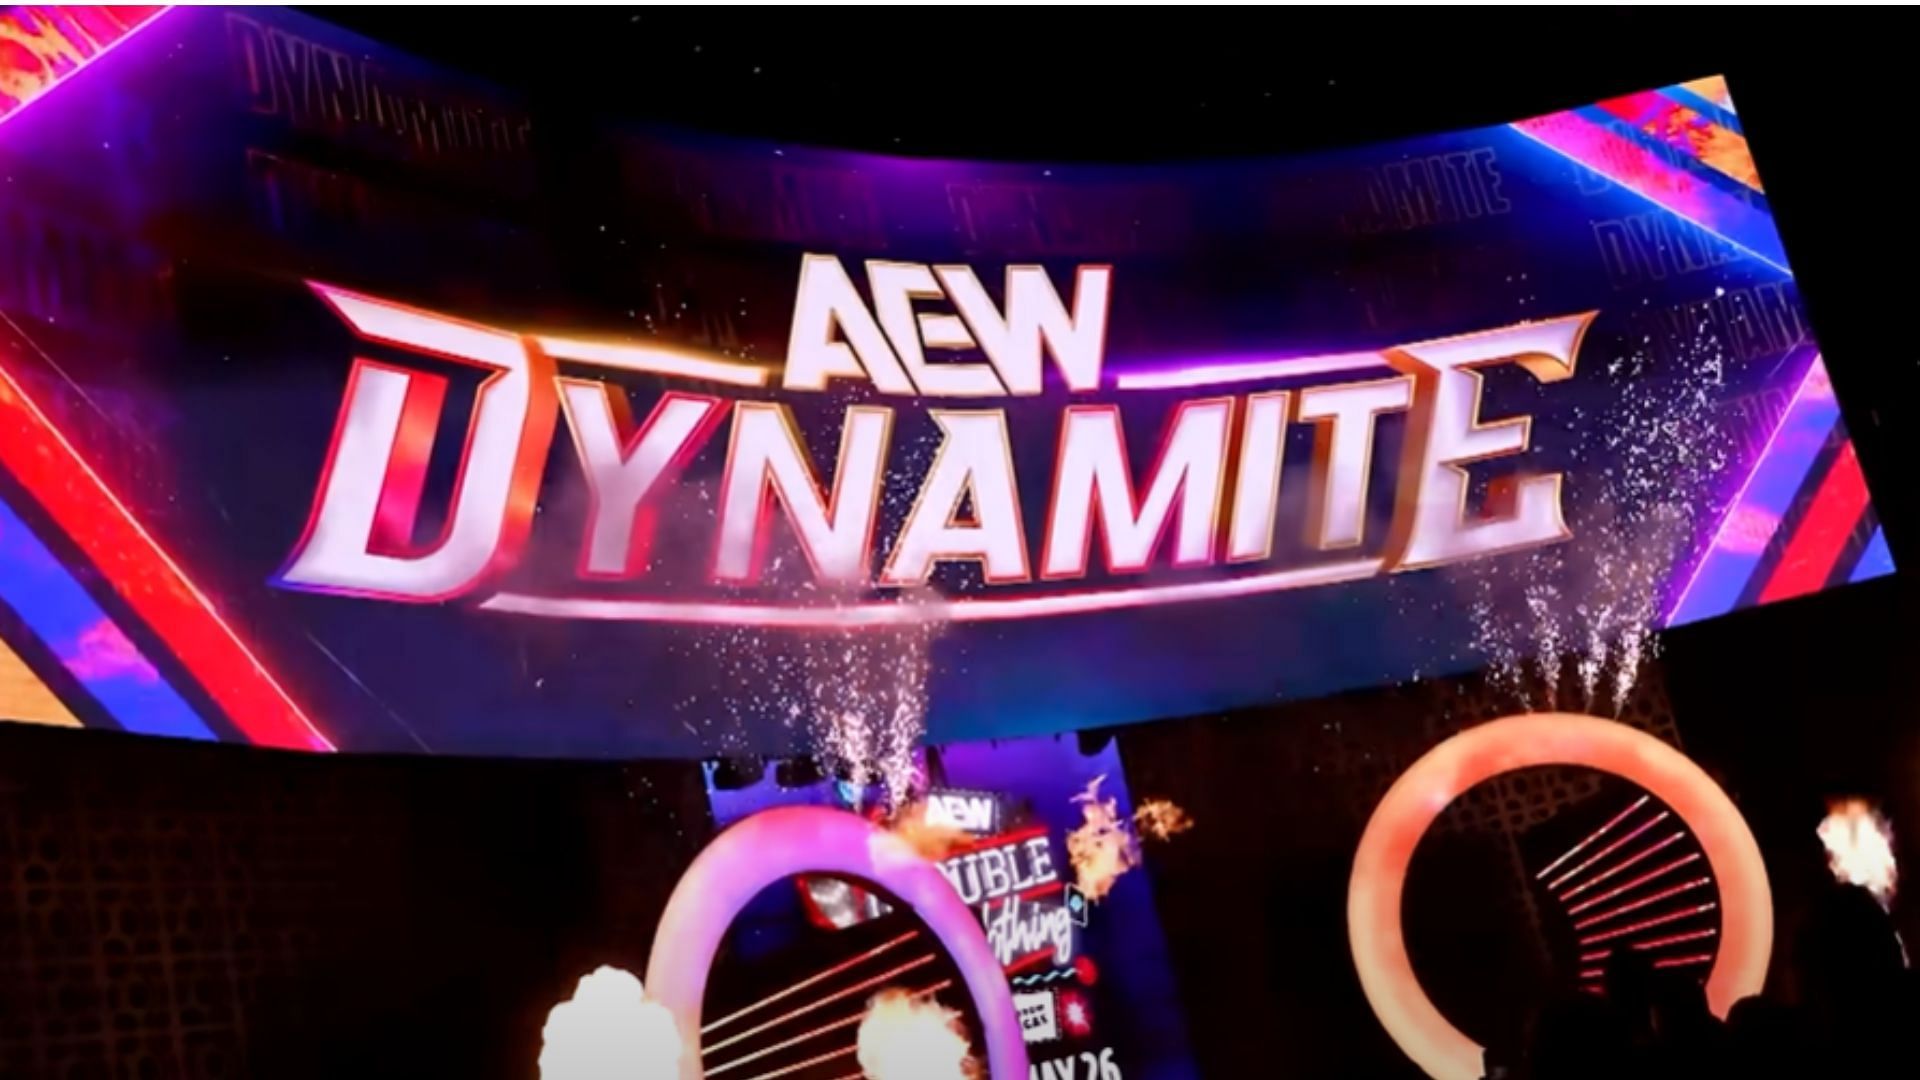 The latest edition of AEW Dynamite aired from Bakersfield, CA [Image Credits: AEW